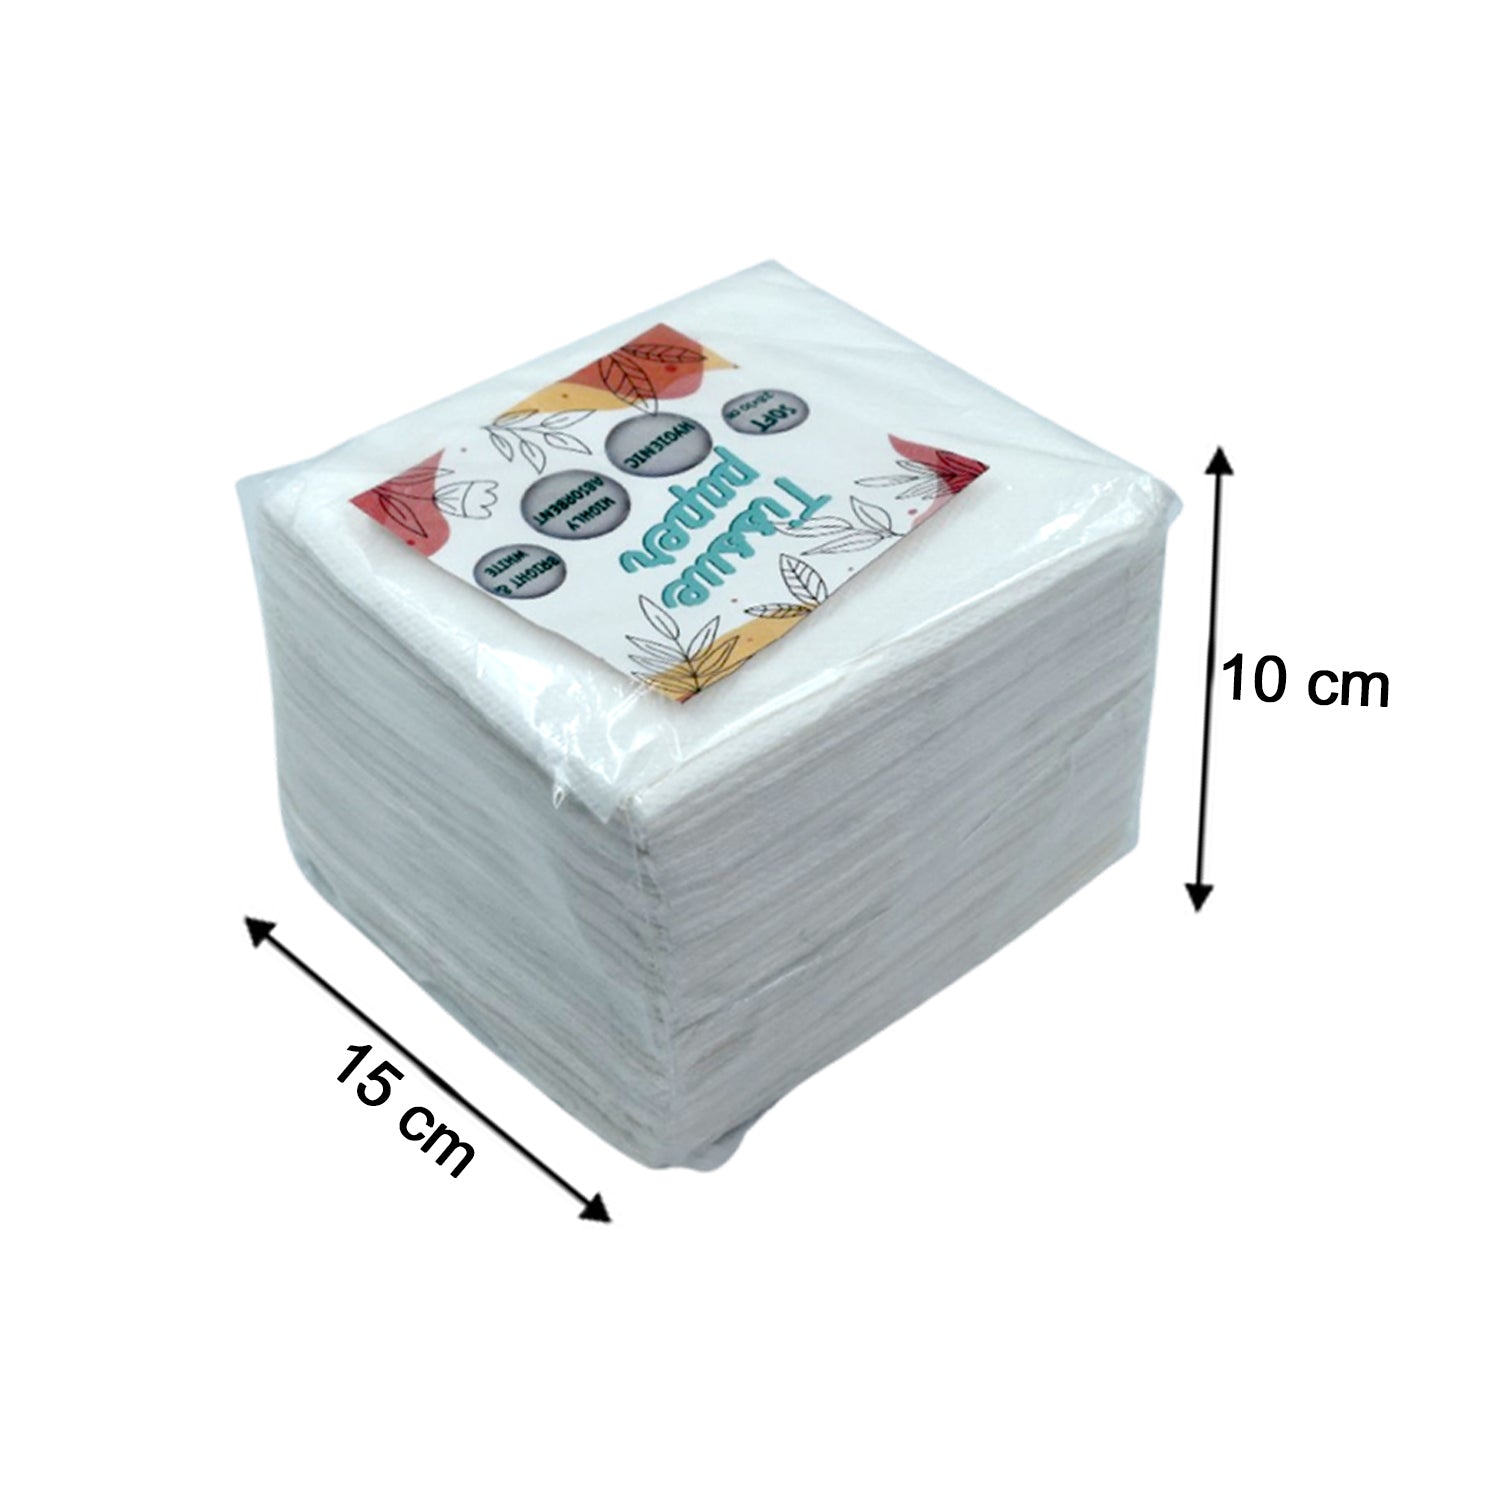 6222 Tissue Paper For Wiping And Cleaning Purposes Of Types Of Things. 